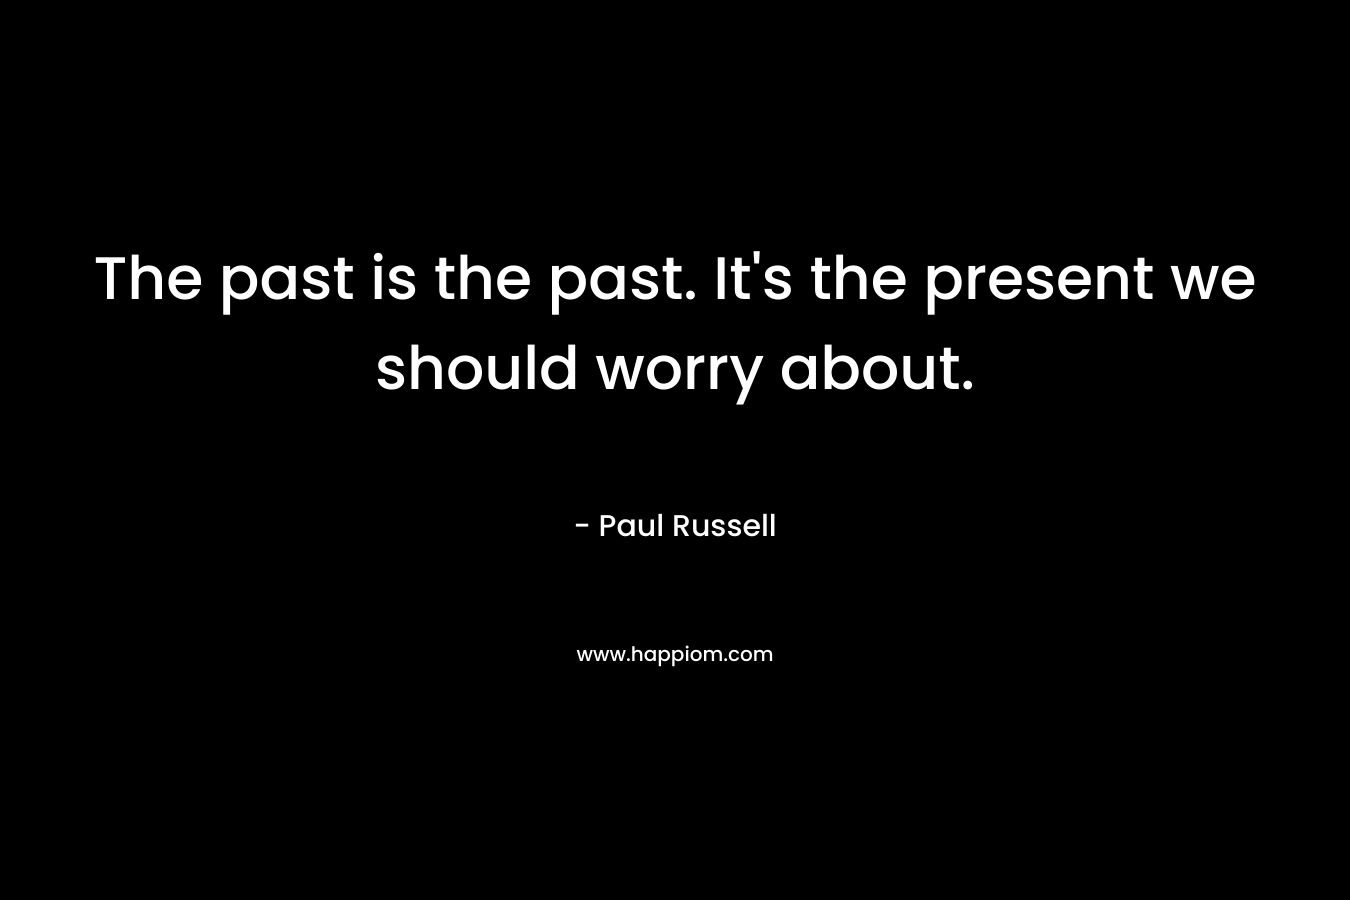 The past is the past. It's the present we should worry about.